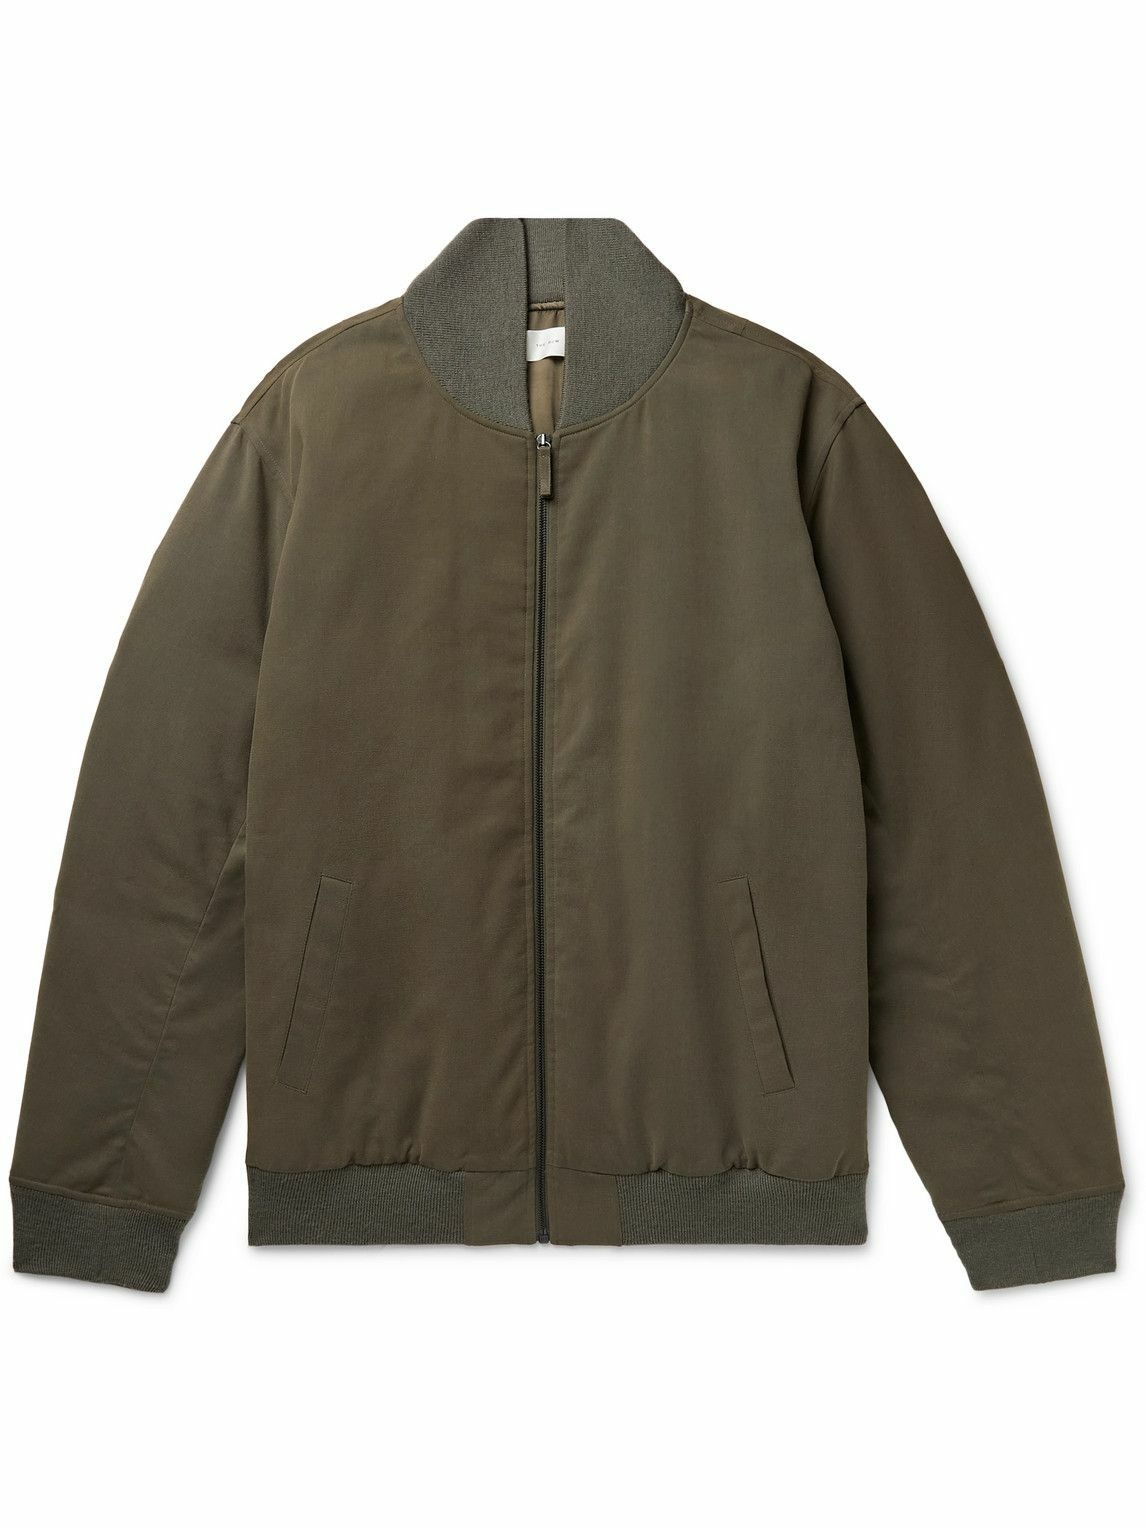 The Row - Shawn Cotton and Silk-Blend Bomber Jacket - Green The Row